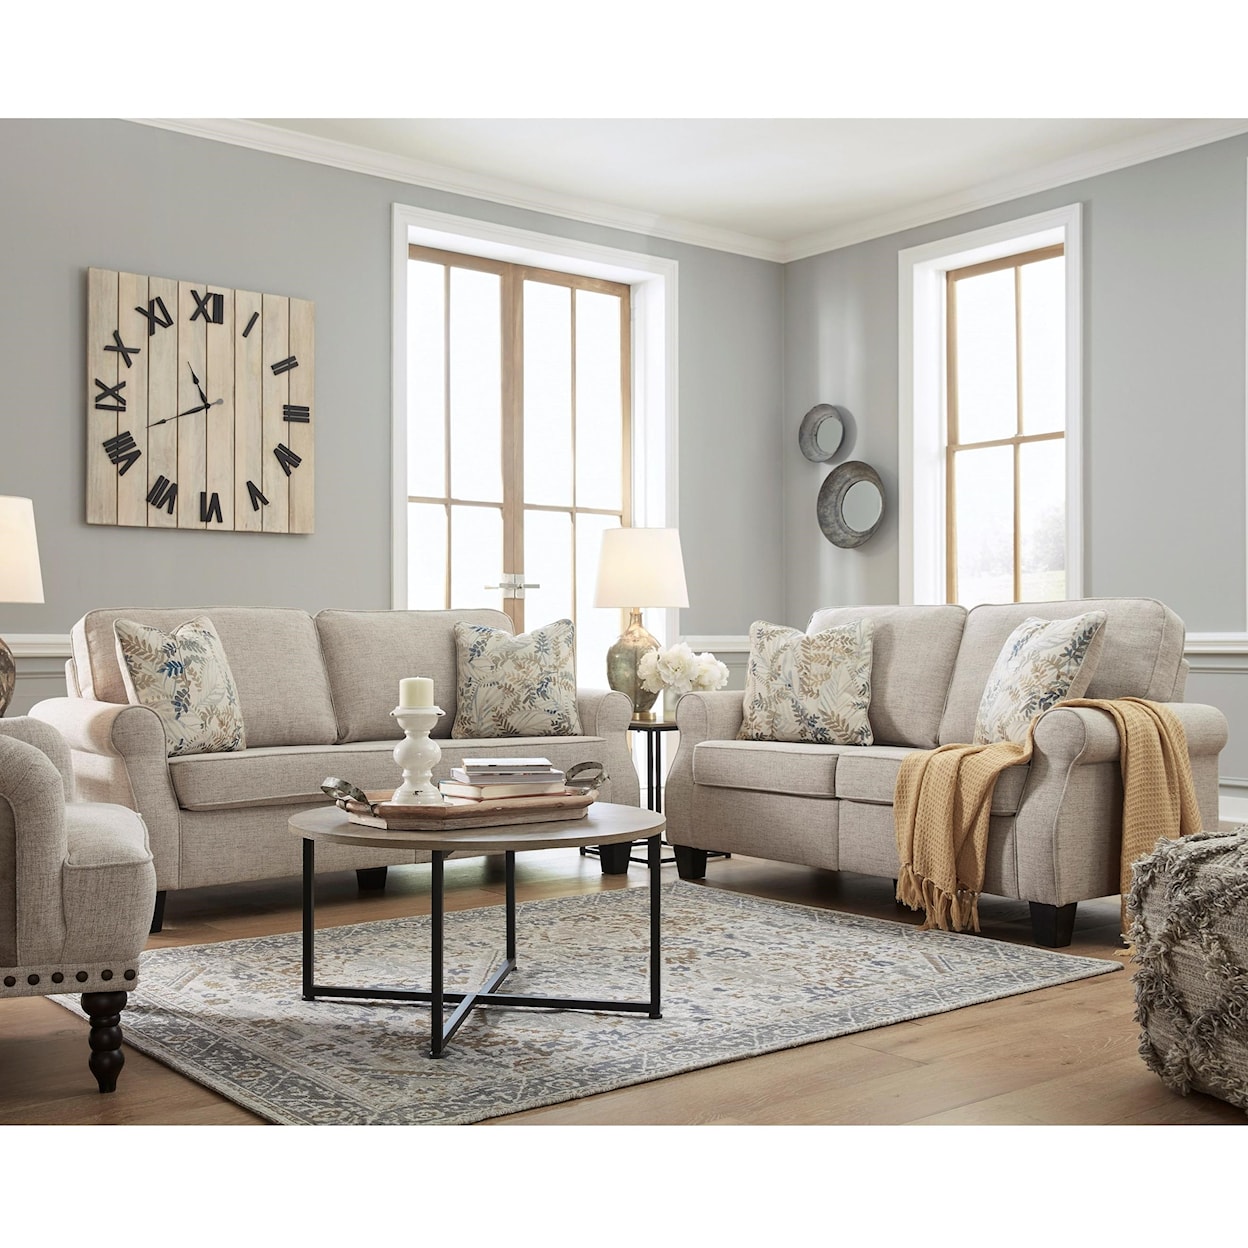 StyleLine Alessio Living Room Group